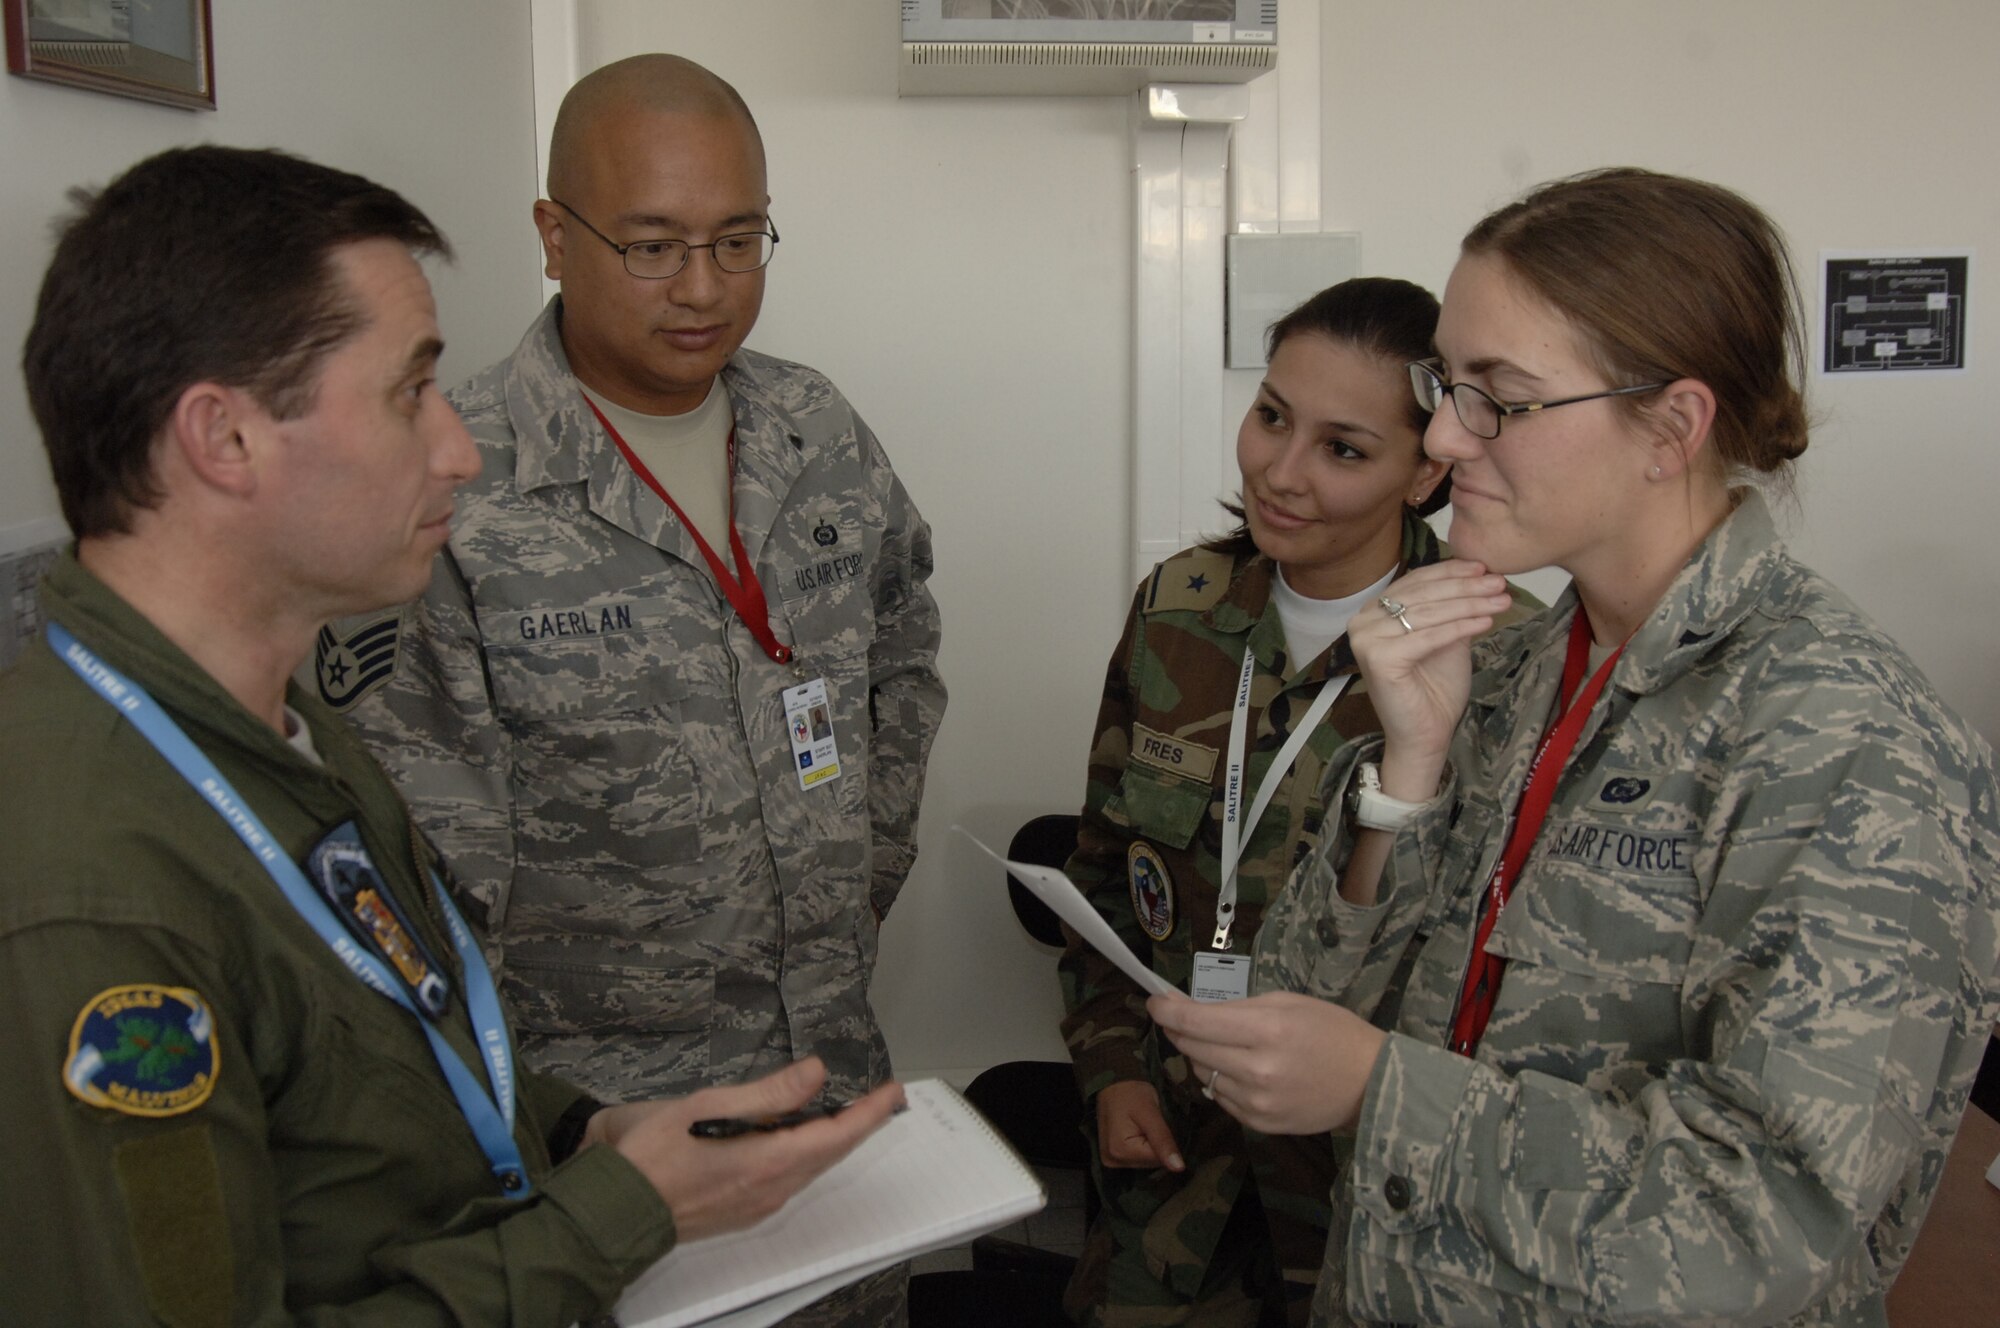 ANTOFAGASTA, Chile -- (From left to right) Maj. Gianotti Javier, Argentinian Air Force, Staff Sgt. Drew Gaerlan, 612th Air Operations Center, 2nd Lt. Stephanie Fres, Fuerza Aérea de Chile or FACH, and Capt. Nicole Golden, 612th AOC, discuss intelligence planning Oct. 20 at Cerro Moreno Air Base during SALITRE, a multinational exercise sponsored by Chile to promote interoperability. Chile, Brazil, France, Argentina and the United States are participating in the exercise. (U.S. Air Force photo by Tech. Sgt. Eric Petosky)